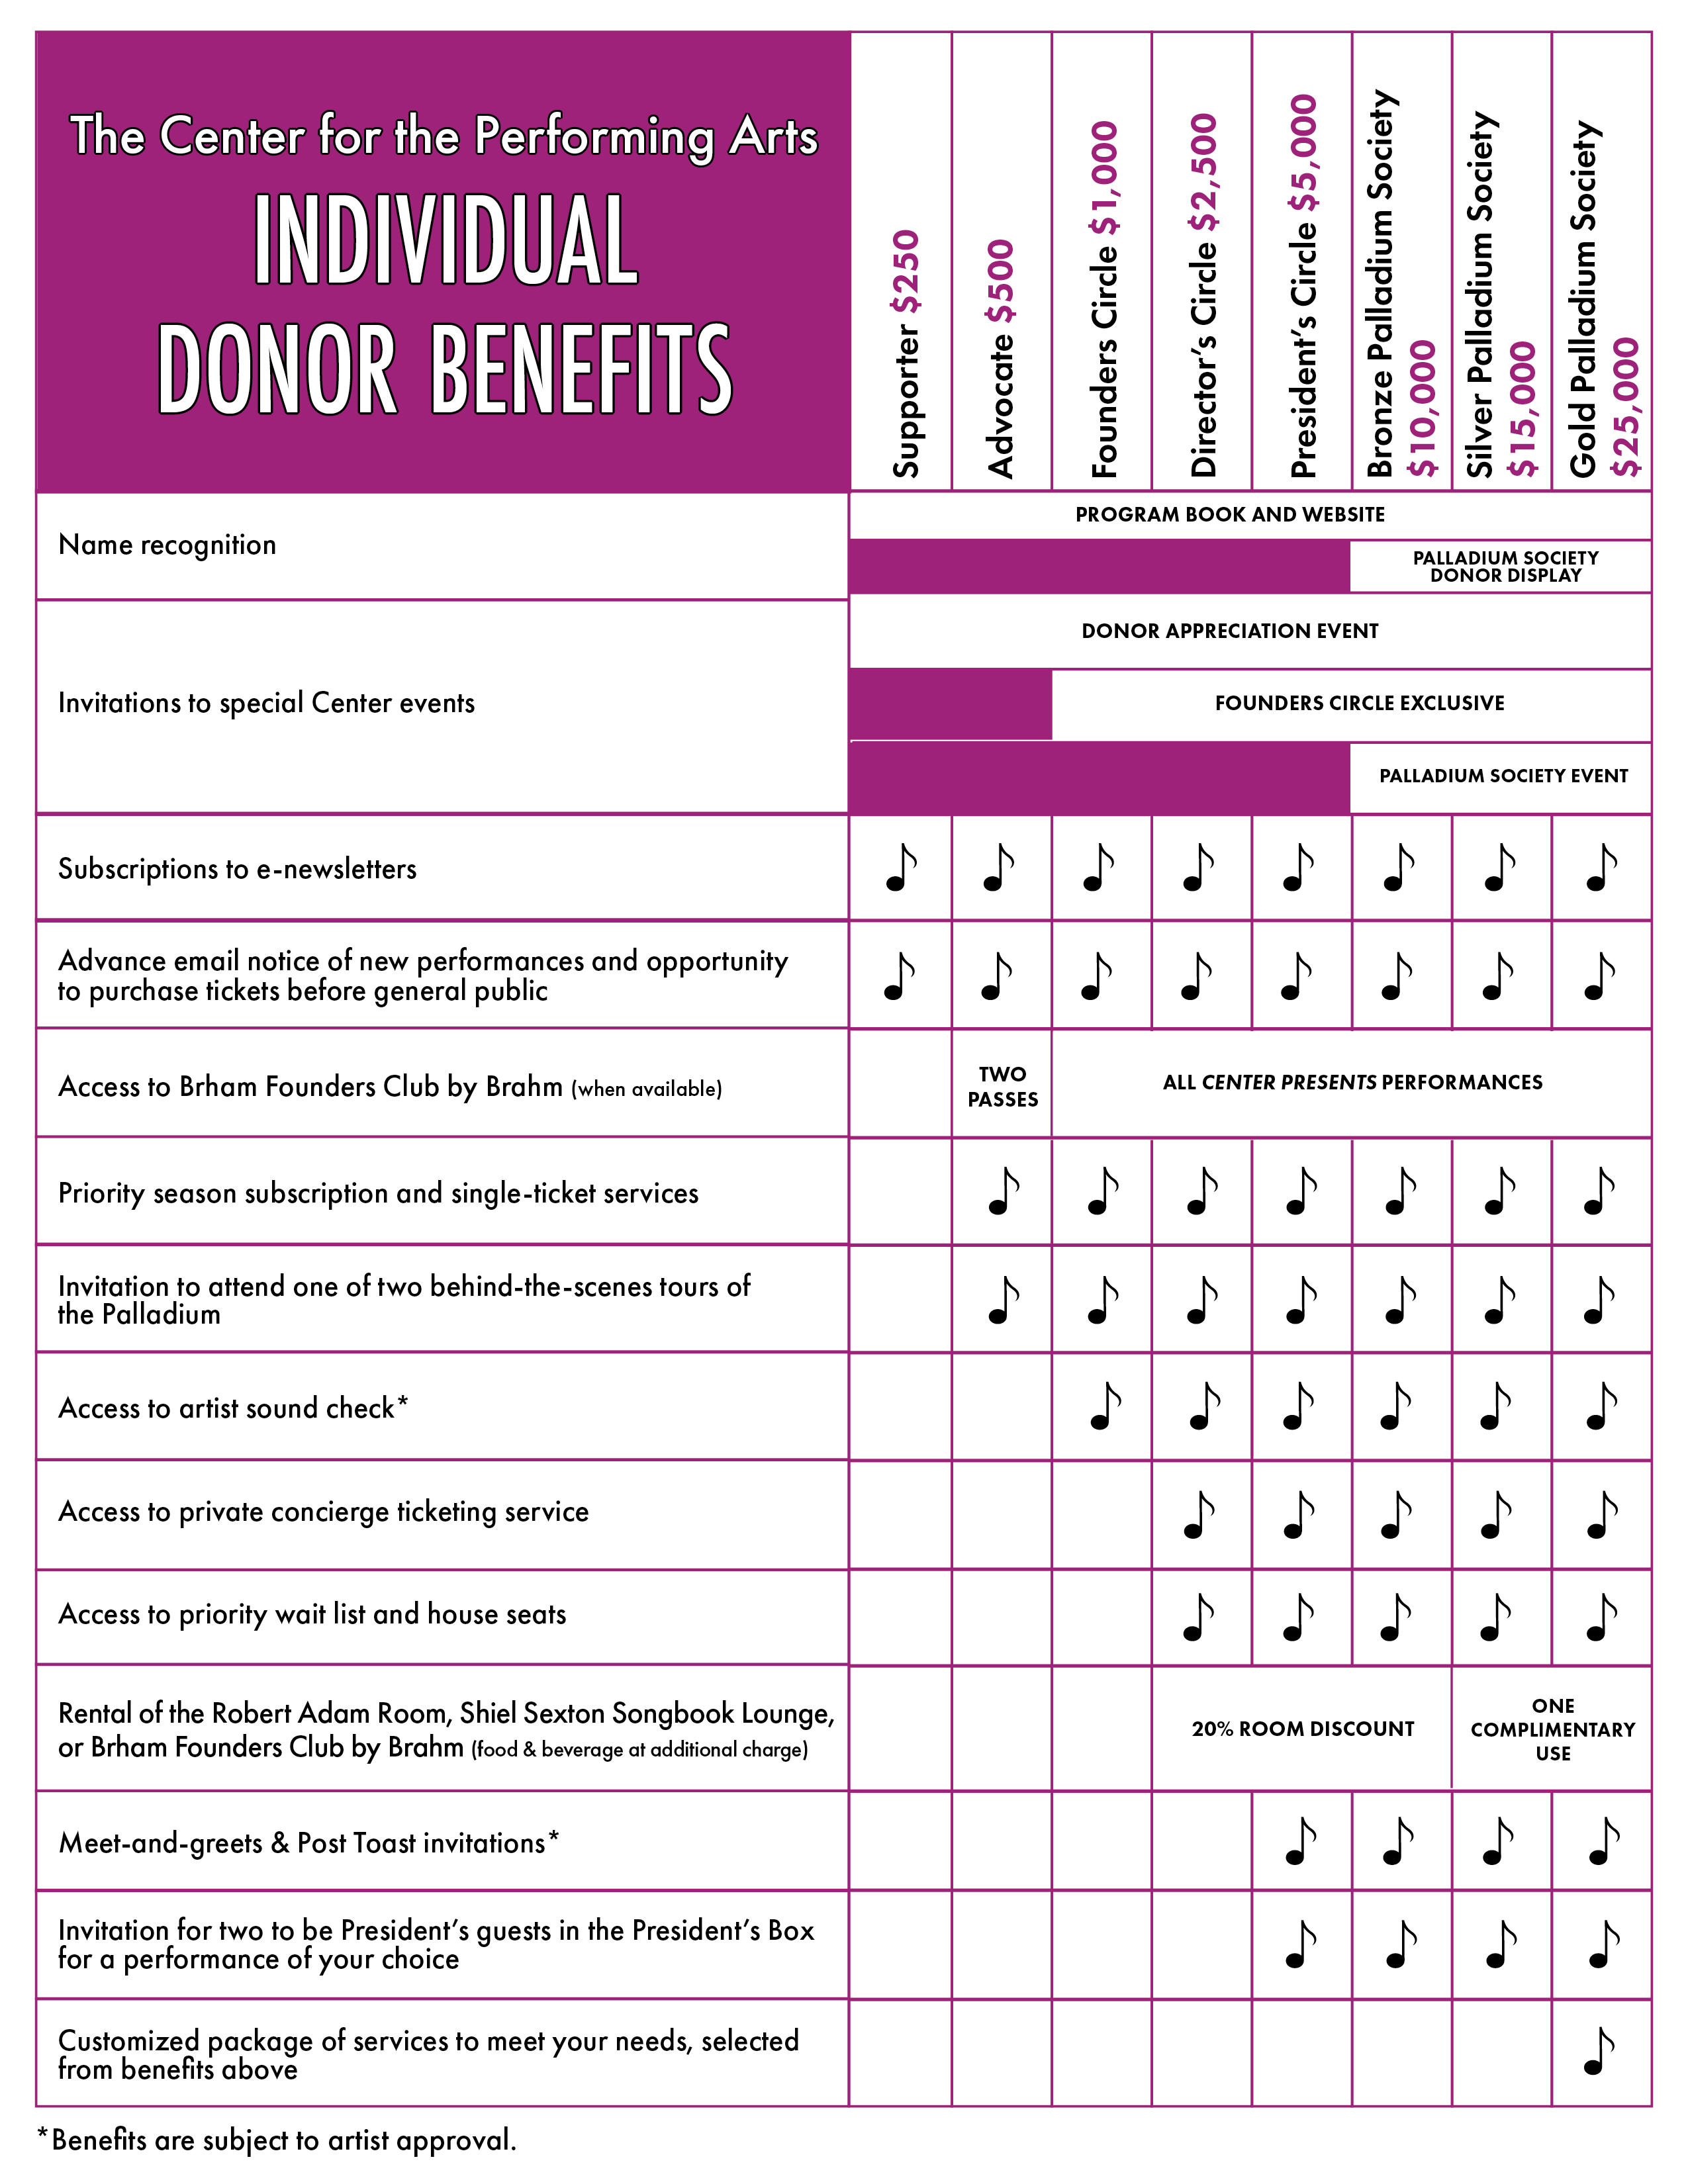 Individual Donor Benefits chart. Click to open PDF.